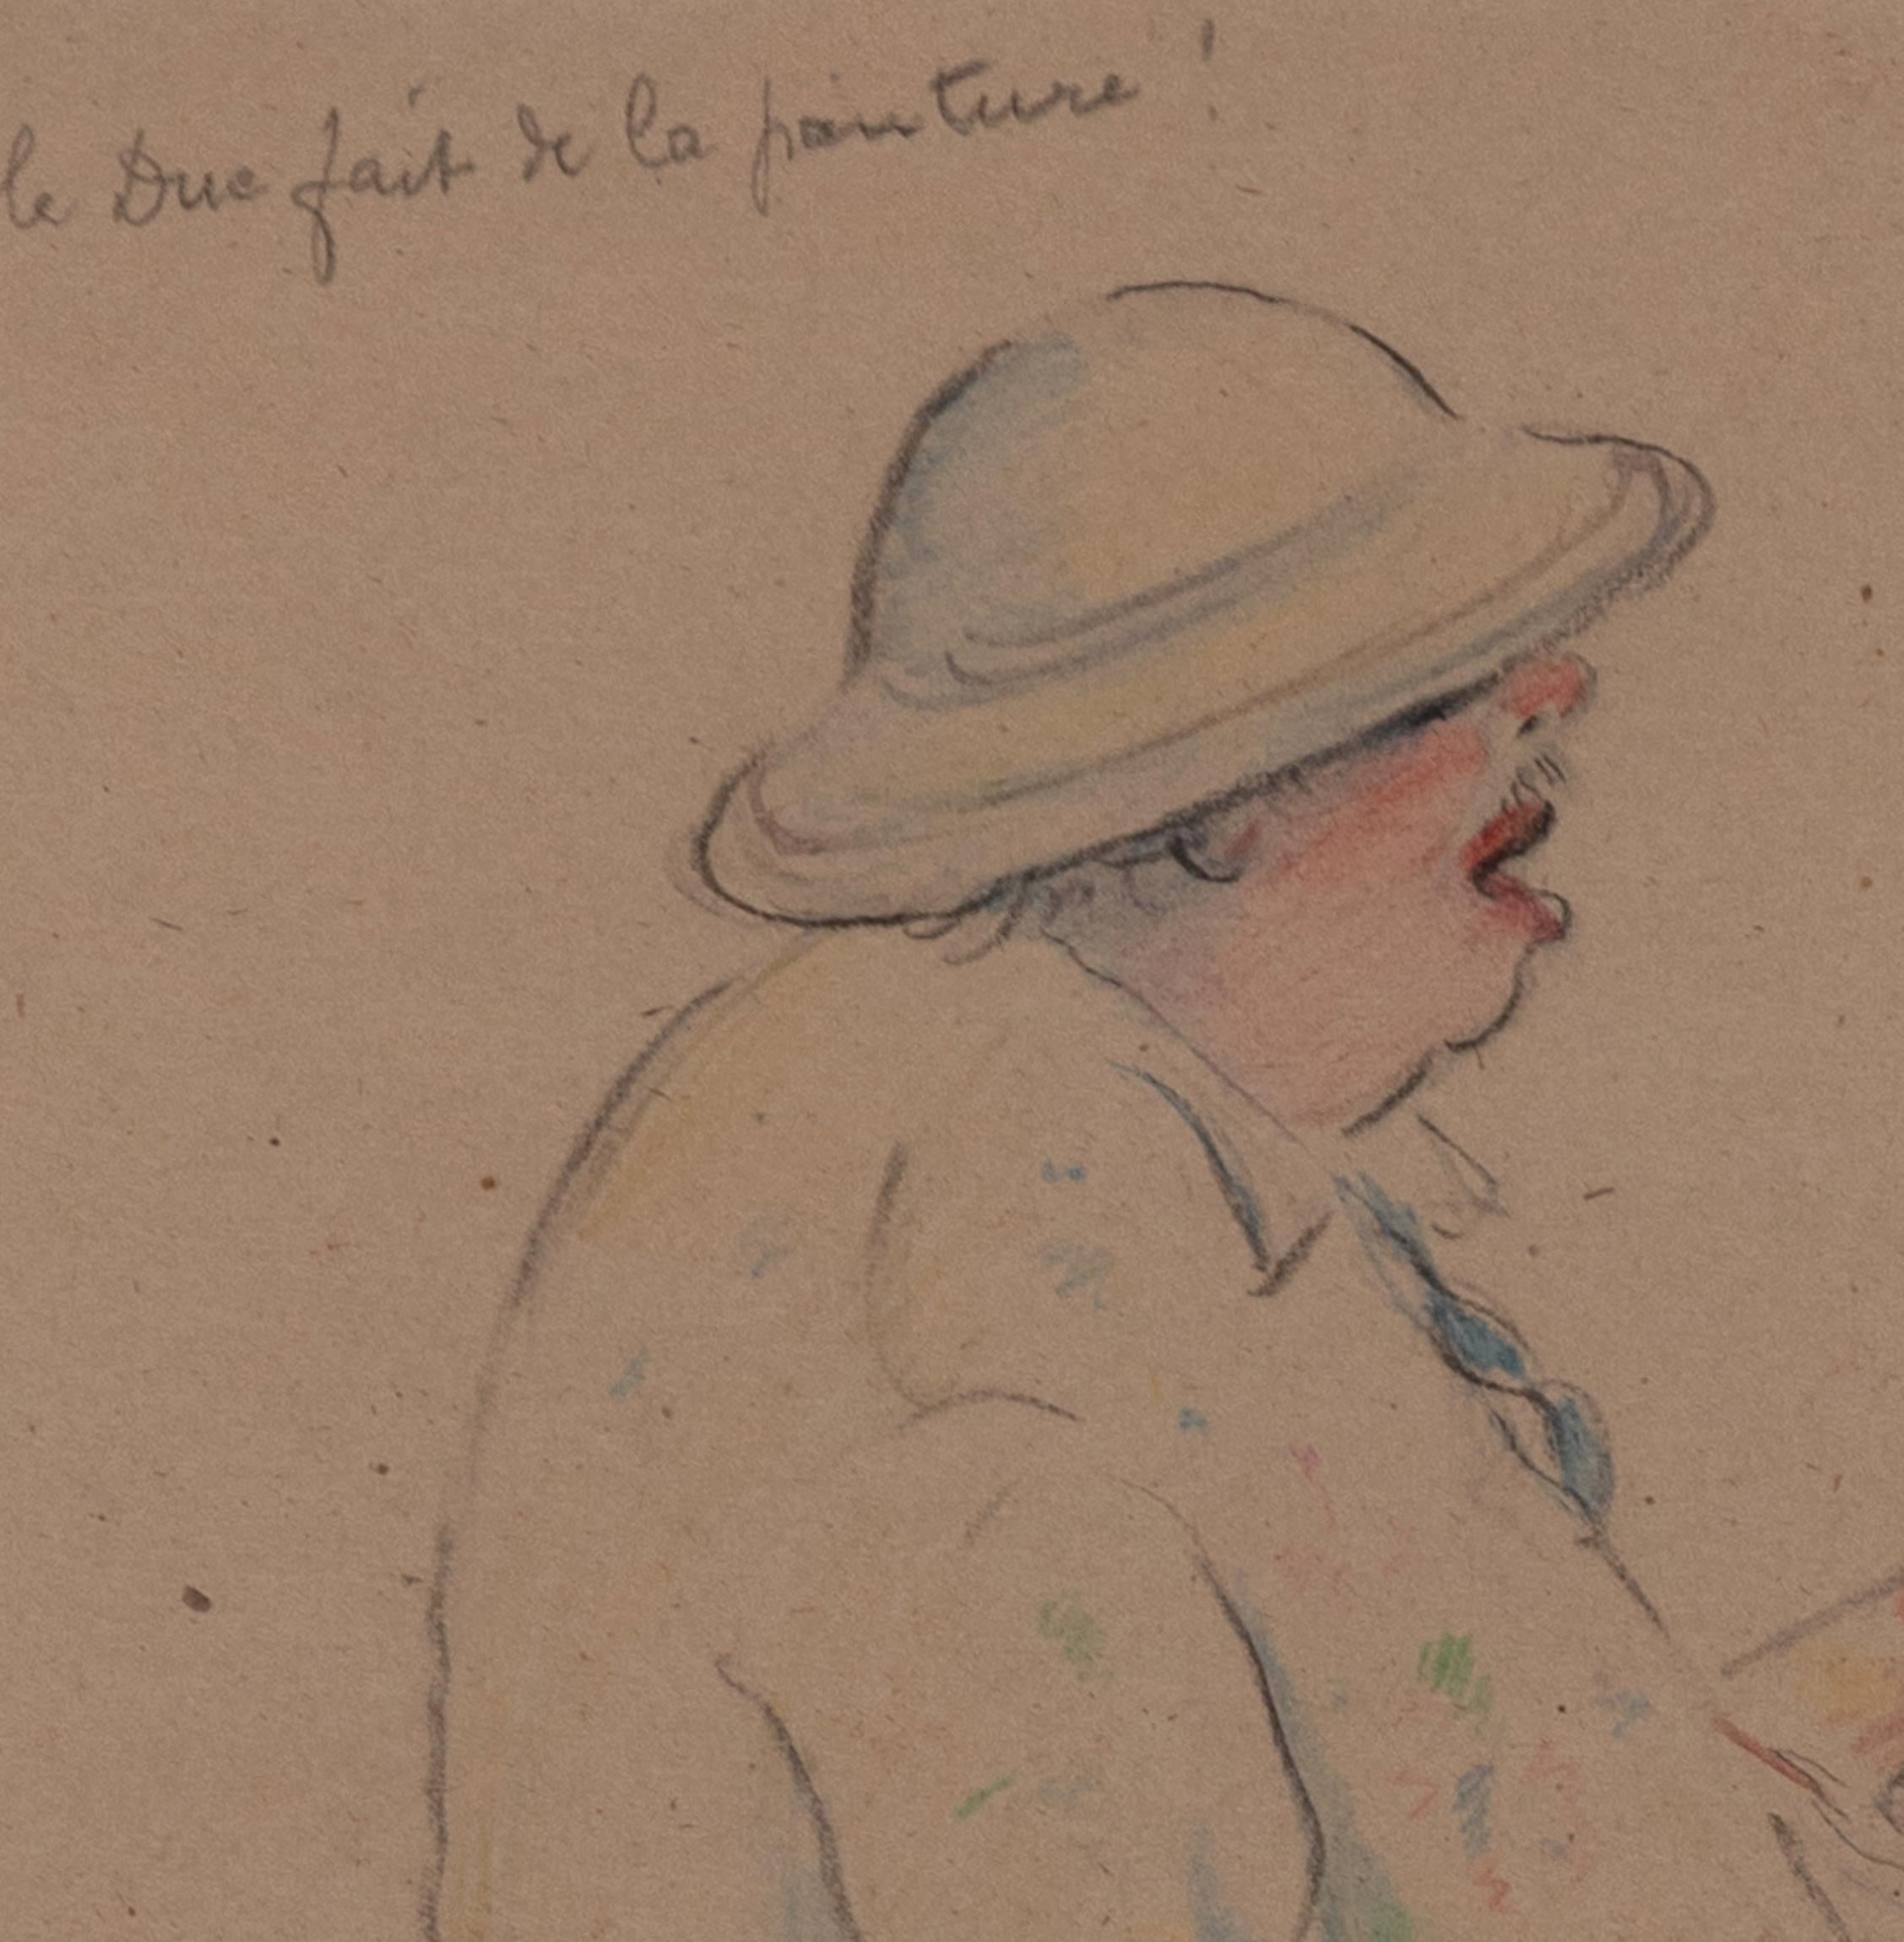 *UK BUYERS WILL PAY AN ADDITIONAL 20% VAT ON TOP OF THE ABOVE PRICE

Le Due Fait de la Peinture by Georges Manzana Pissarro (1871-1961)
27.5 x 18.3 cm (10 ⁷/₈ x 7 ¹/₄ inches)
Graphite and coloured crayon on paper
Inscribed upper left and signed